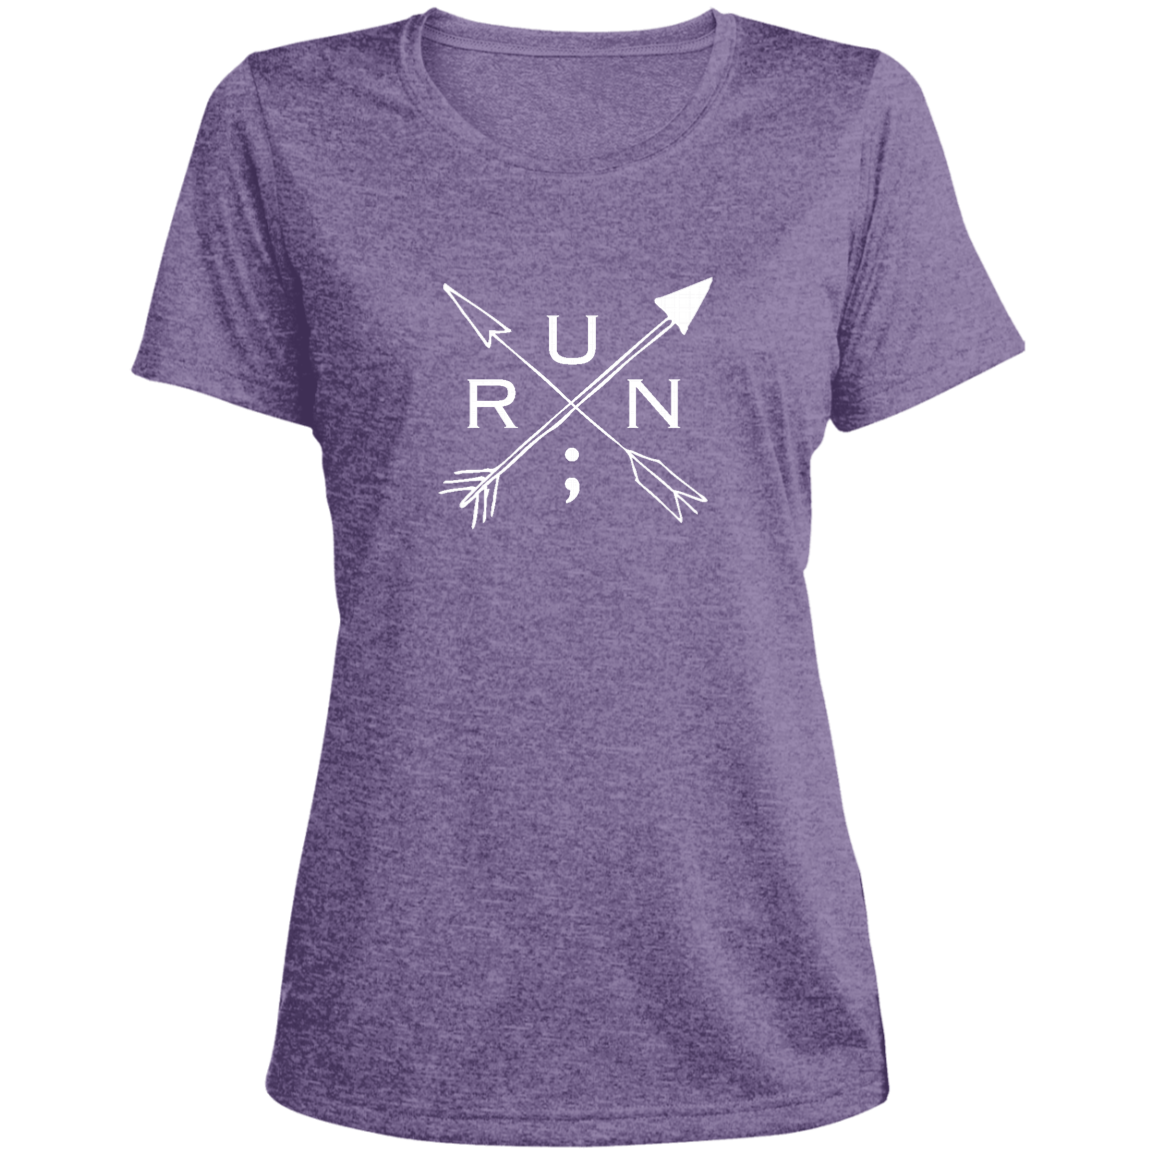 Run Arrows - Fitted Heather Scoop Neck Performance Tee